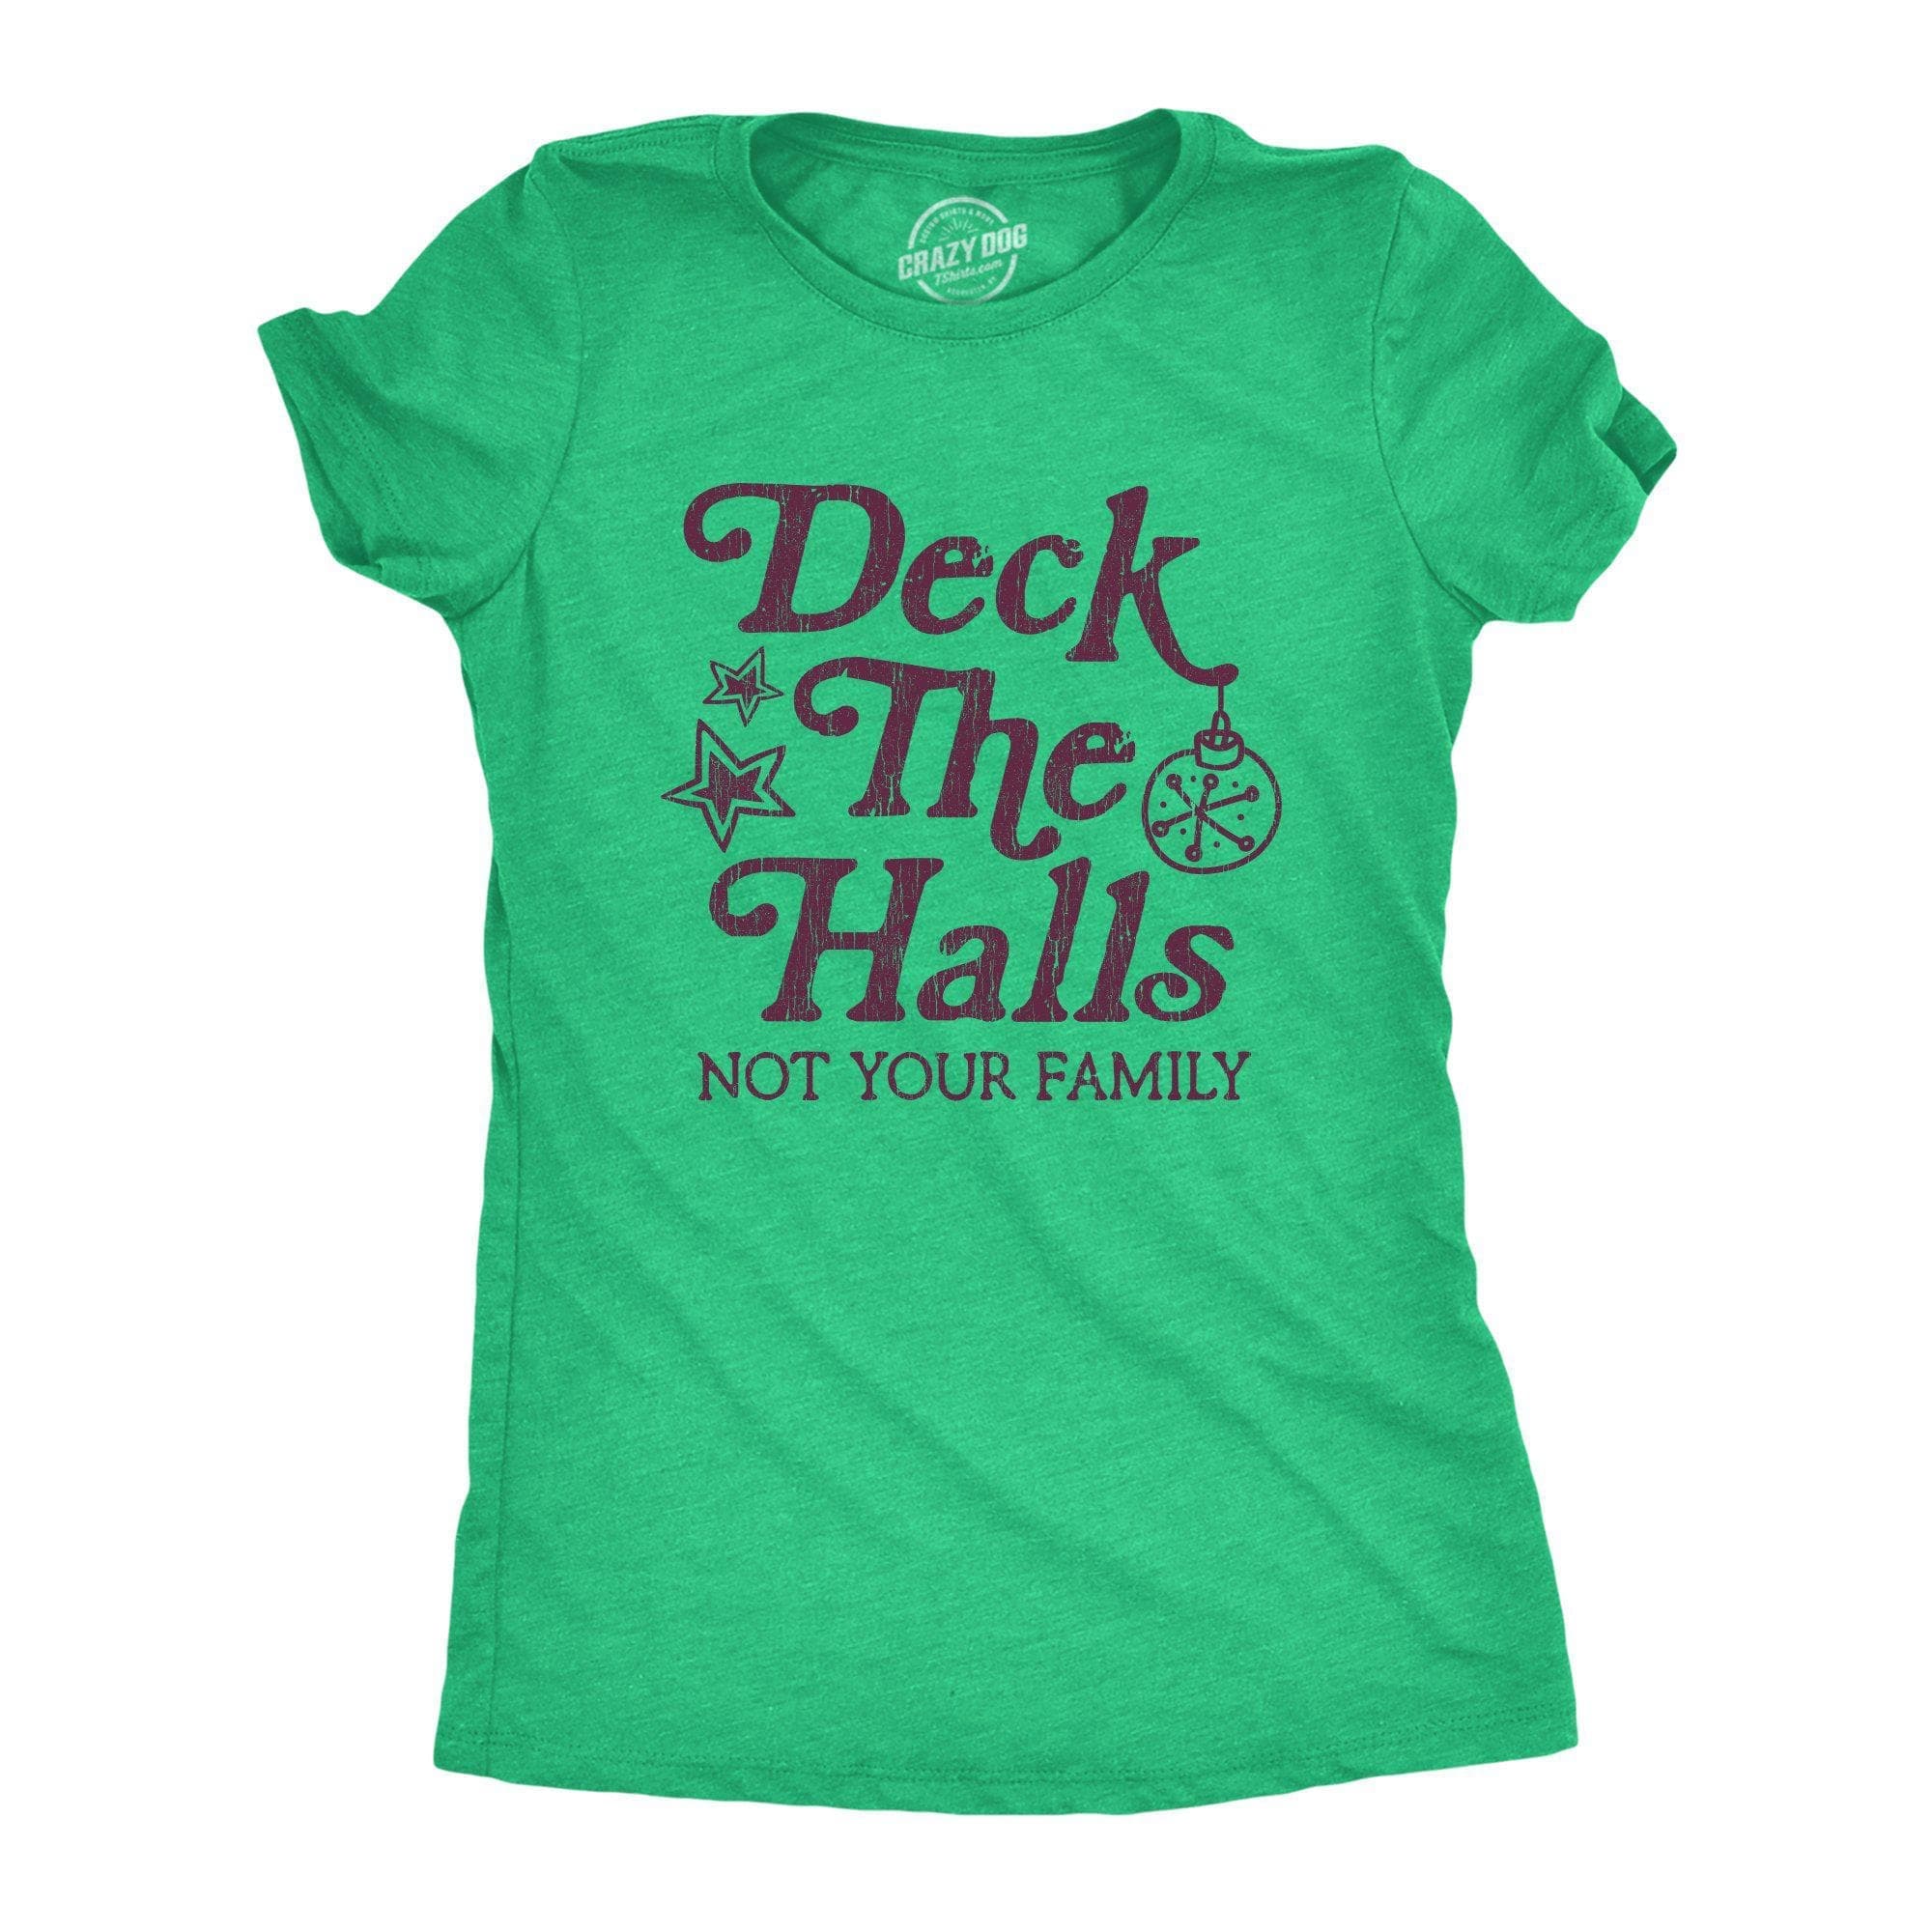 Deck The Halls Not Your Family Women's Tshirt - Crazy Dog T-Shirts